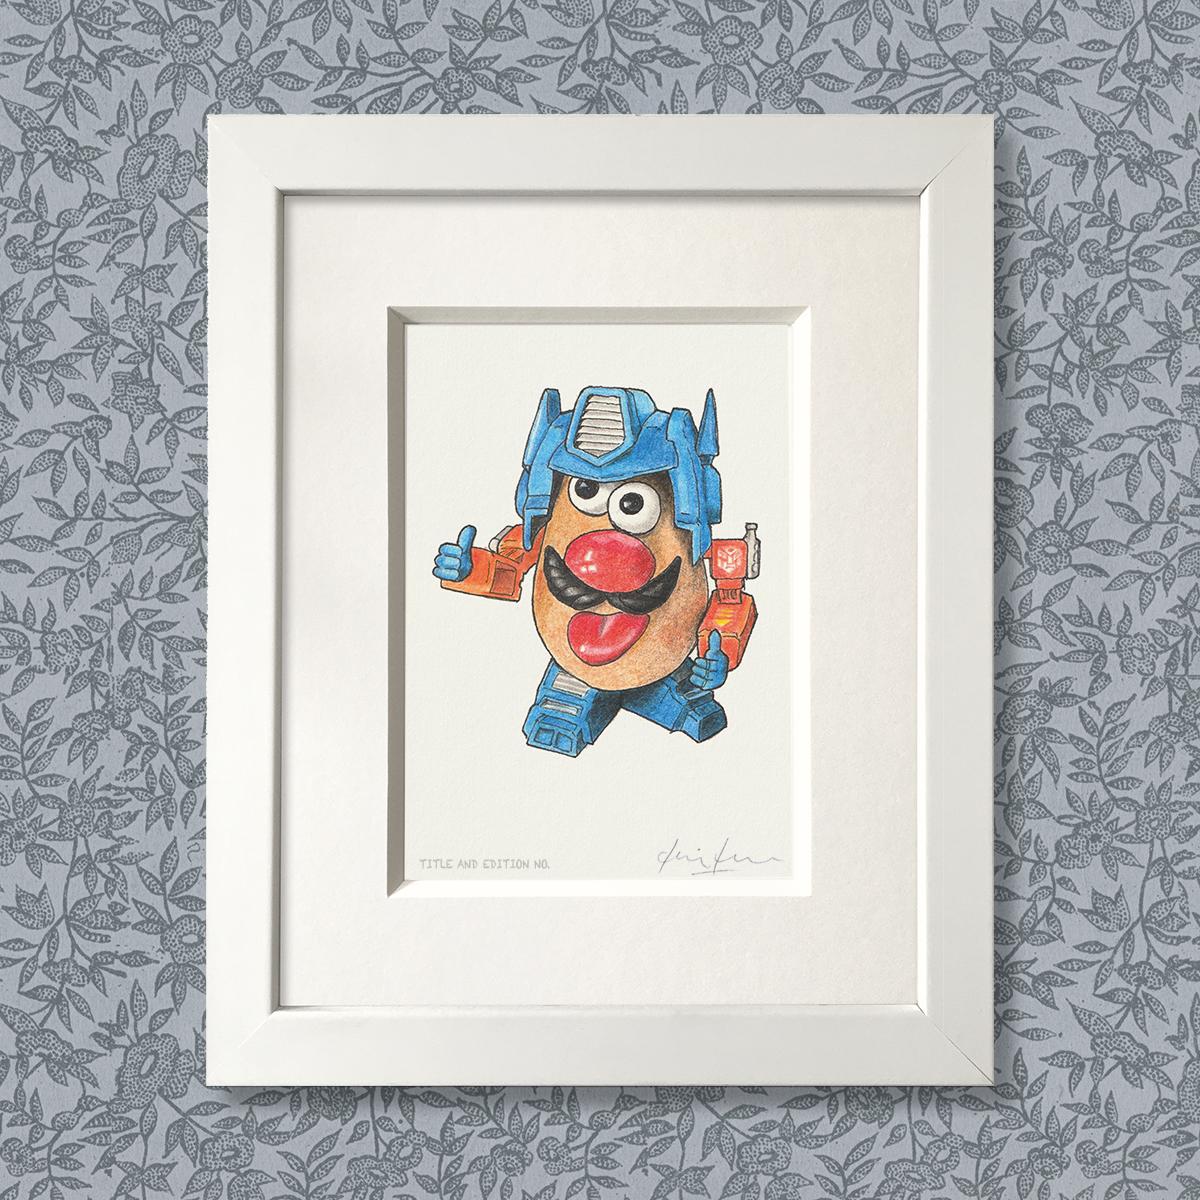 Limited edition print from a pen, ink and coloured pencil drawing of the Mr Potatohead toy dressed as Optimus Prime in a white frame